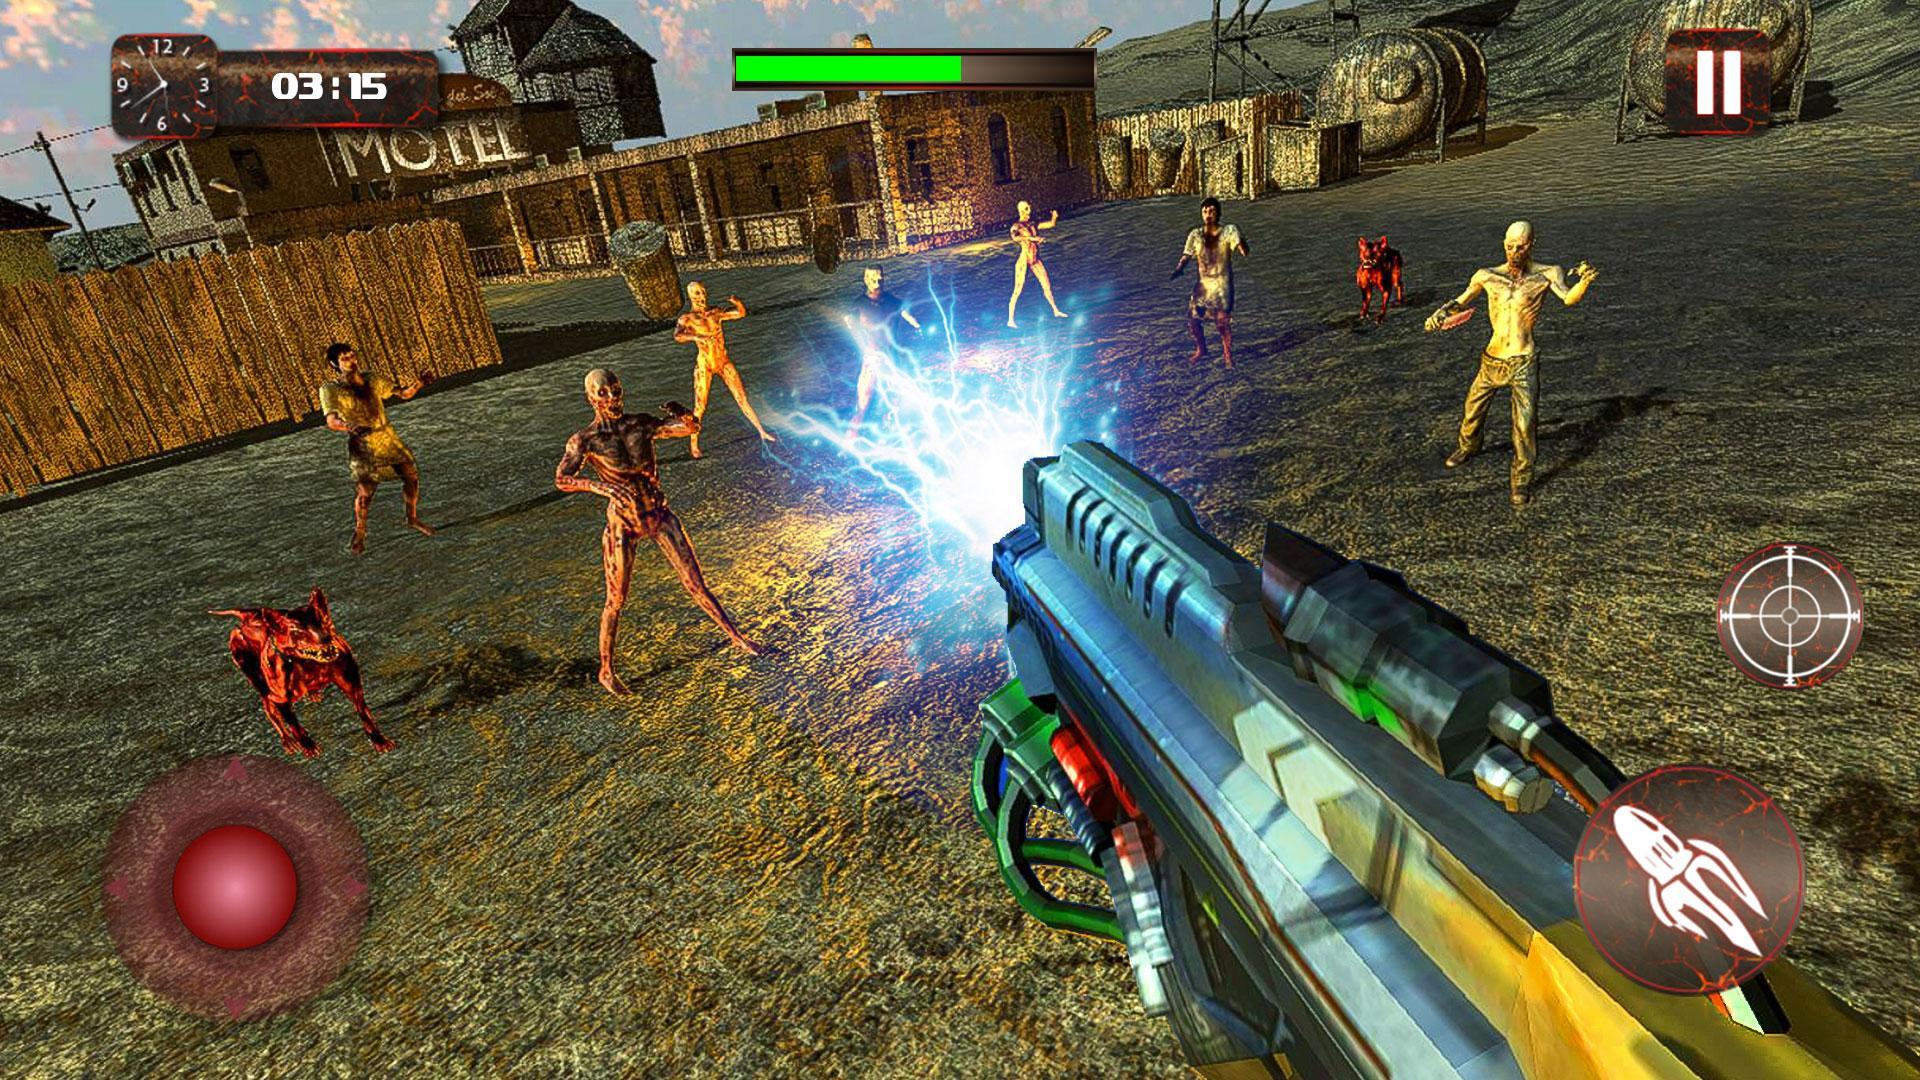 Zombie Strolling Code Z Dooms Dying Survival Light For Android